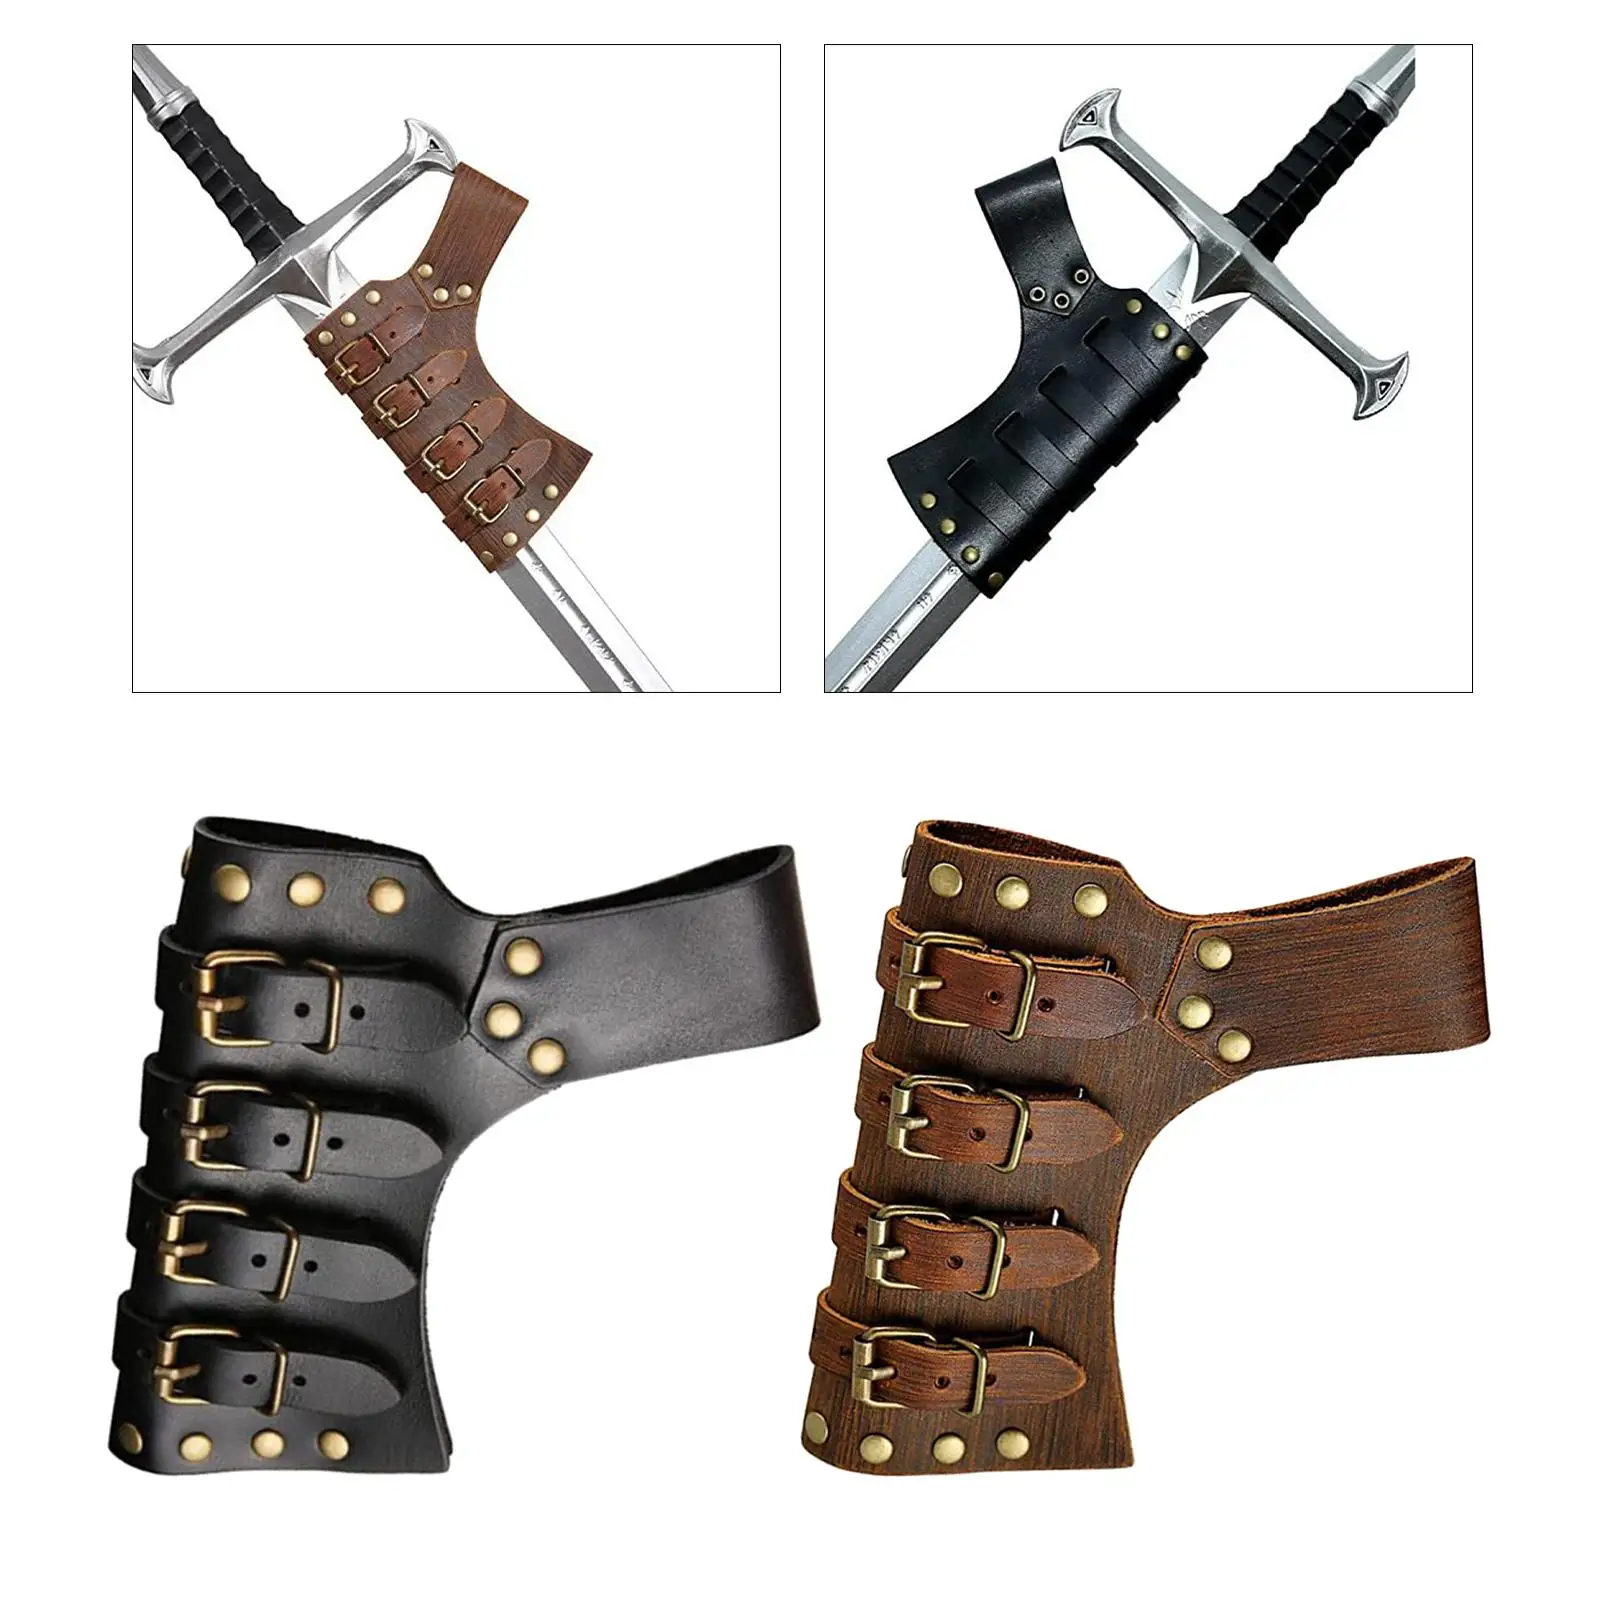 Belt Waist Sheath Costume Accessories Scabbard for Cosplay Performance Party